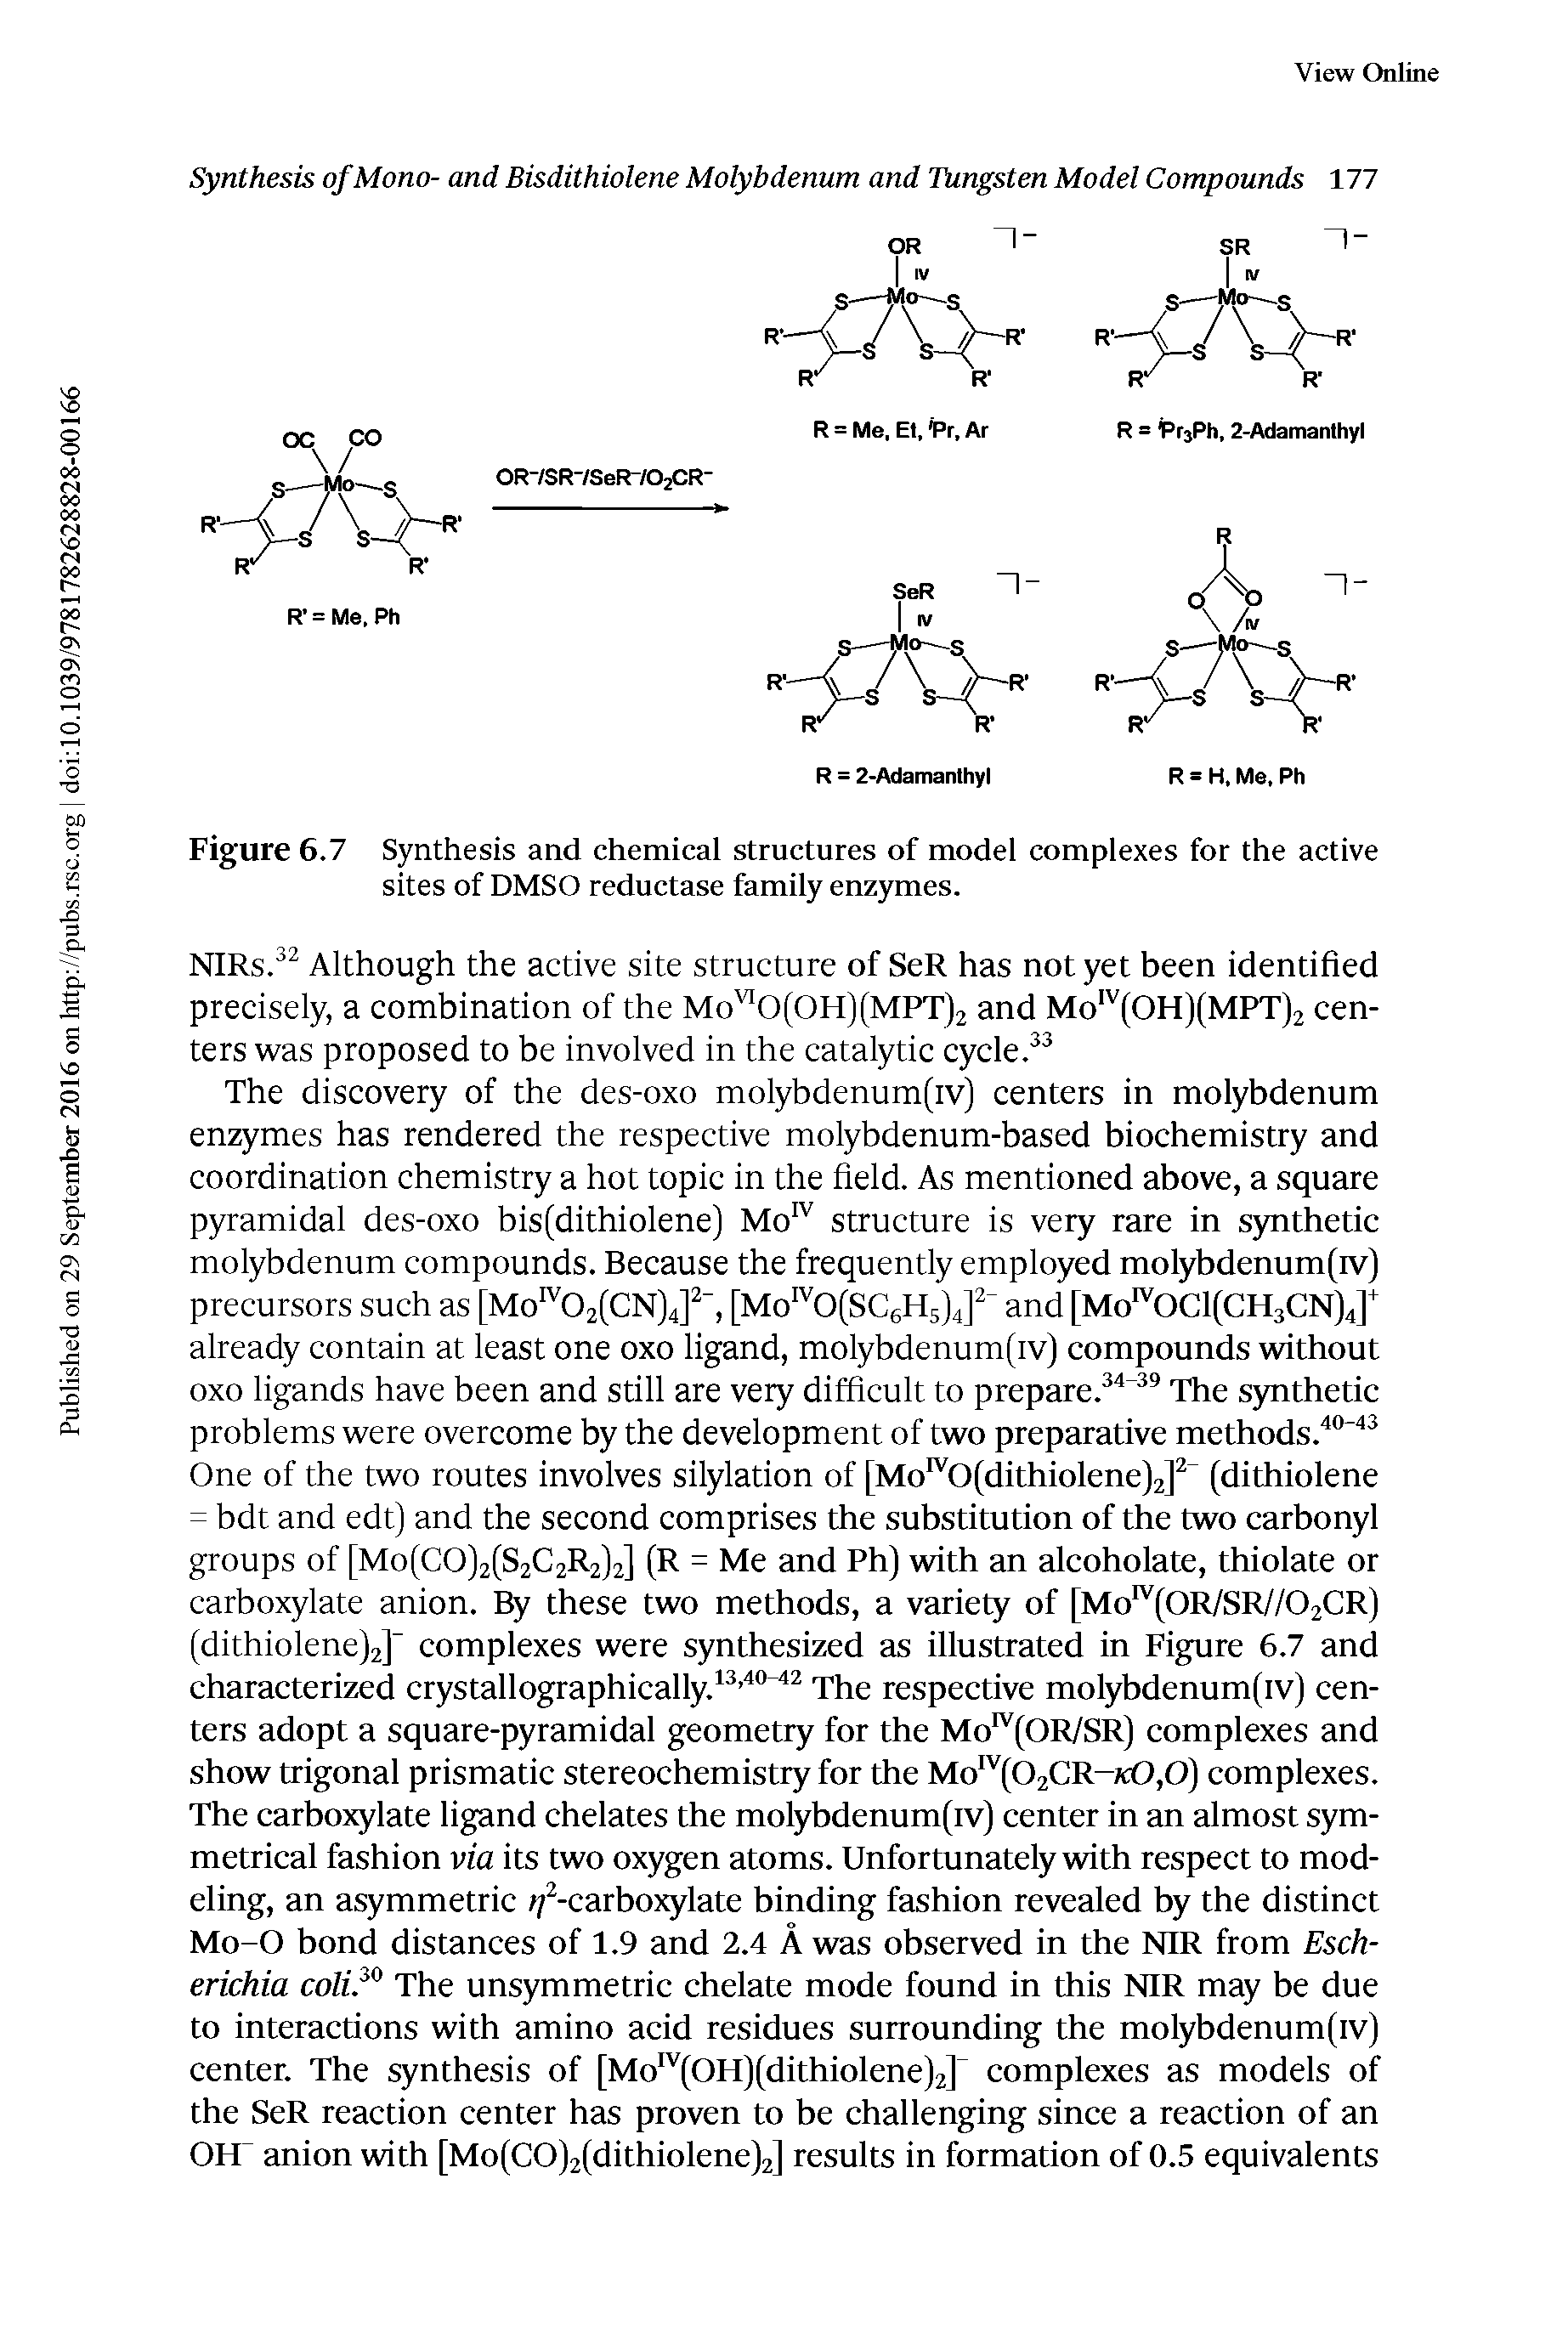 Figure 6.7 Synthesis and chemical structures of model complexes for the active sites of DMSO reductase family enz3mies.